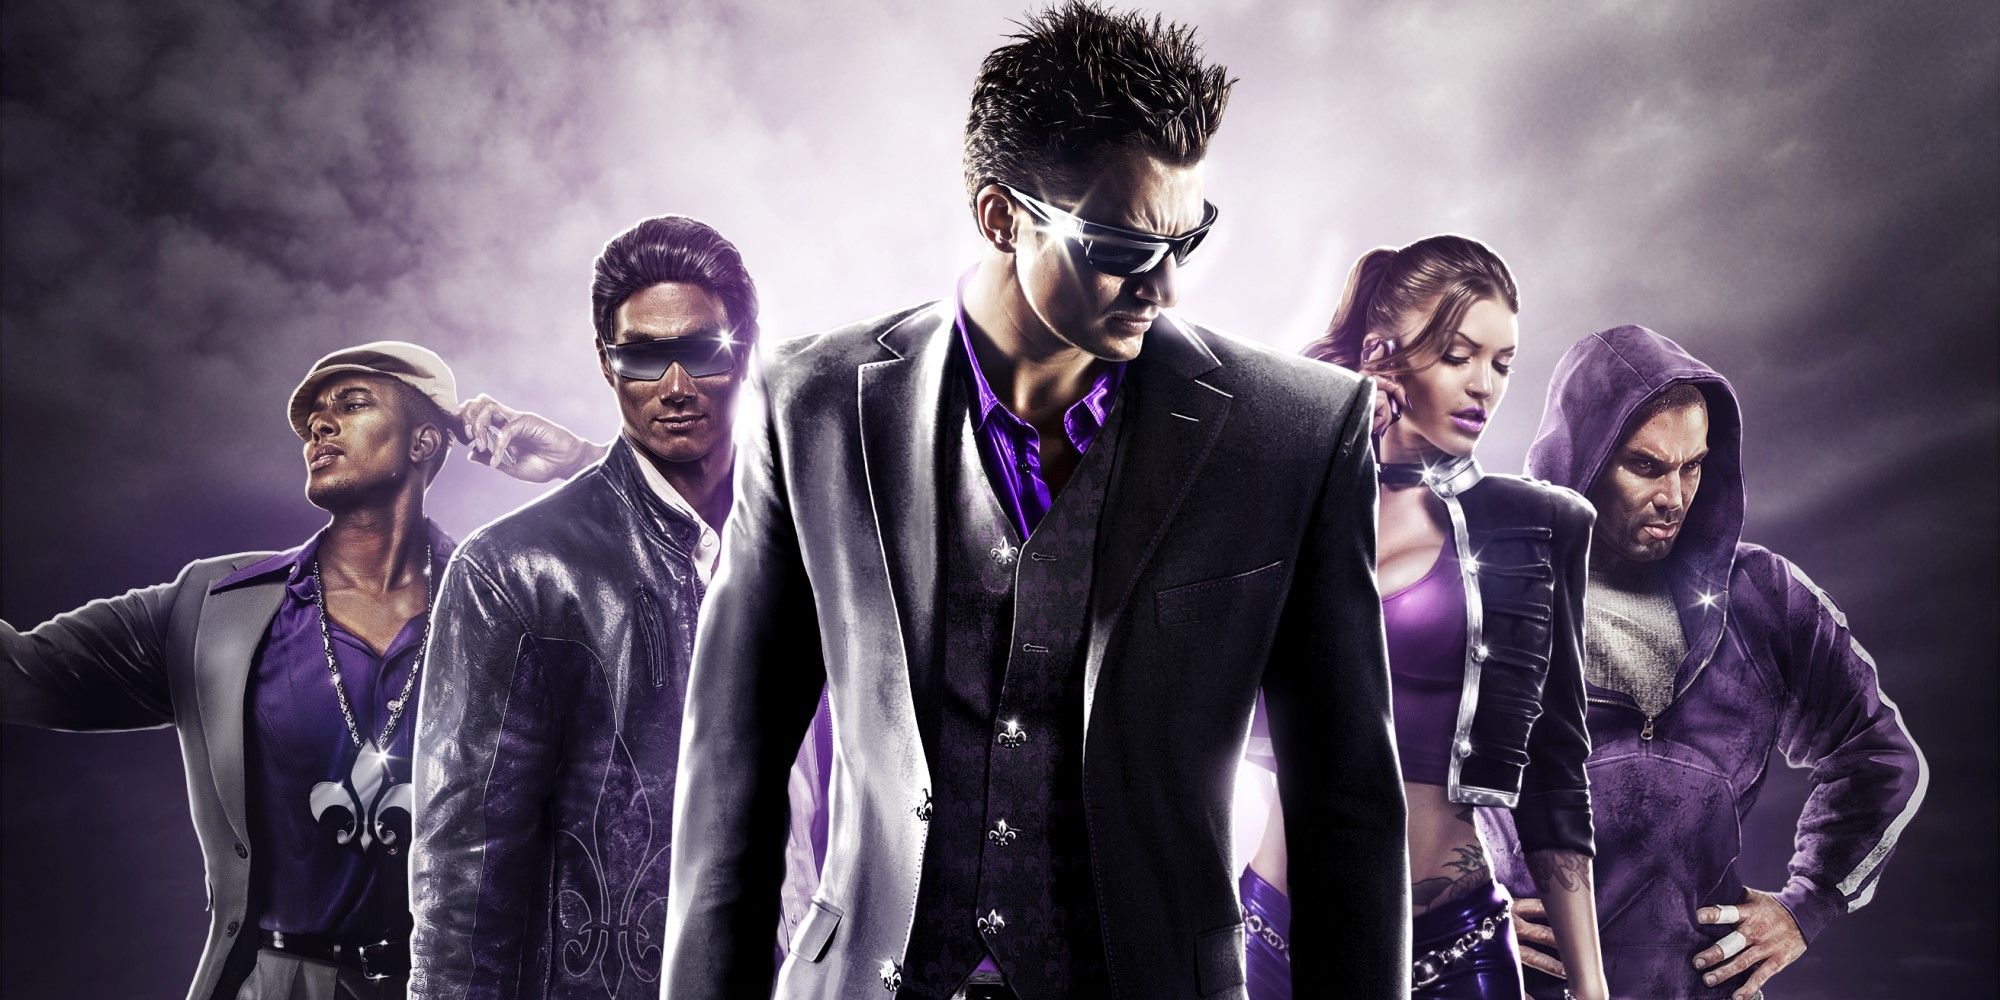 Saints Row the Third Remastered review: Why does it look so good? - The  Washington Post